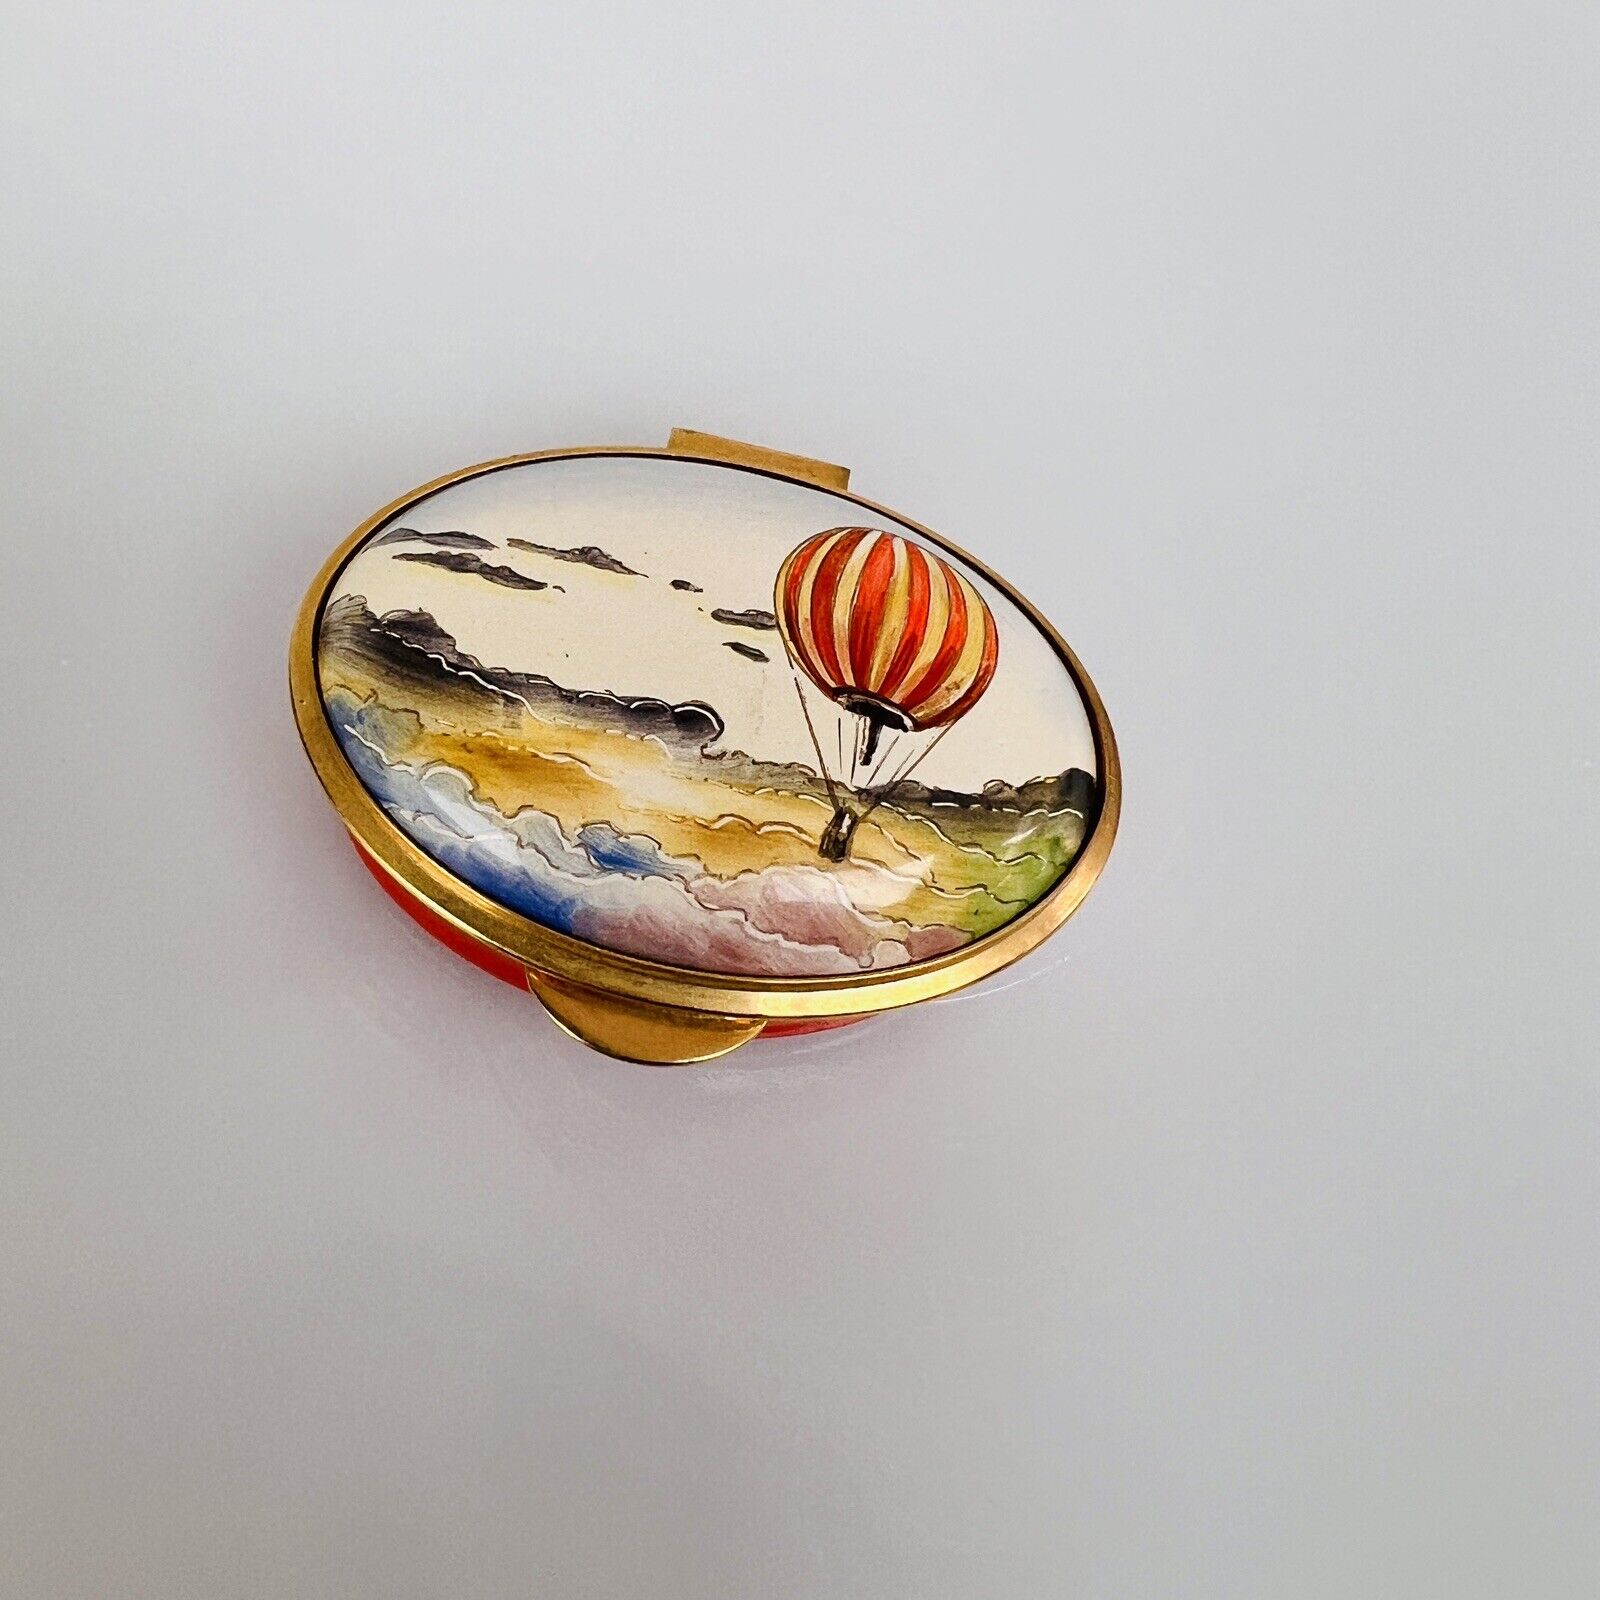 Staffordshire Enamels Trinket Box Hot Air Balloon in Clouds at Sunset